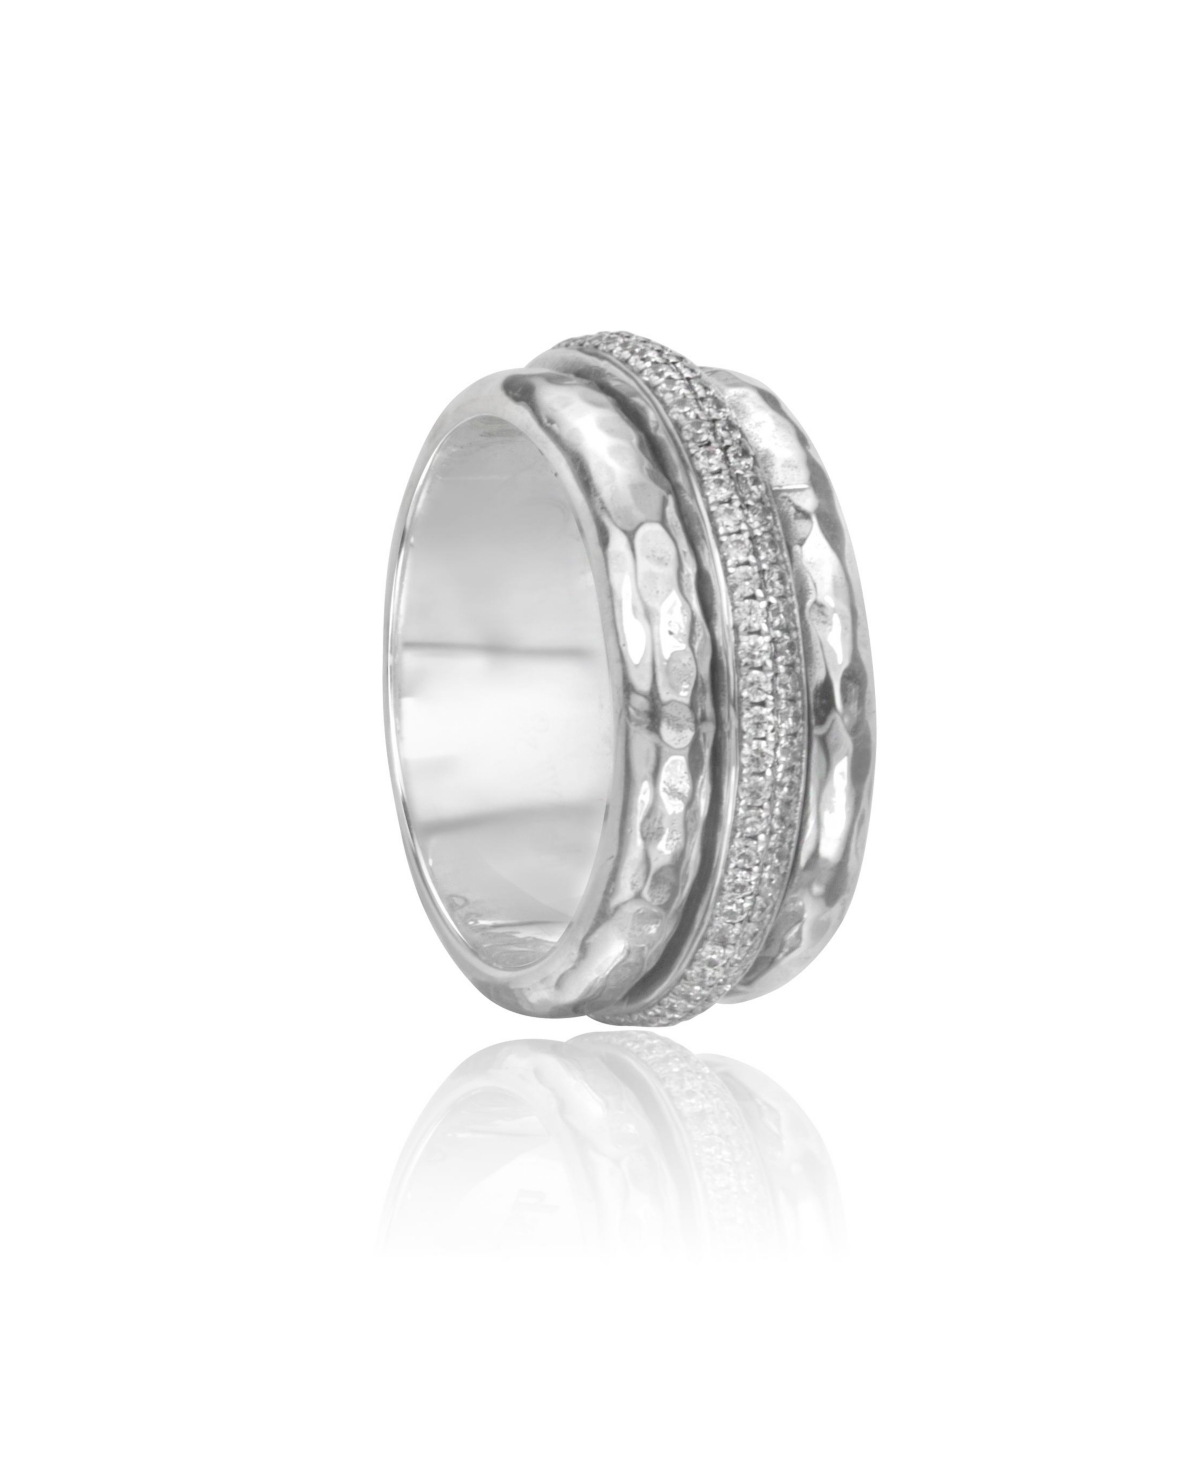 Reflections Ring - Silver